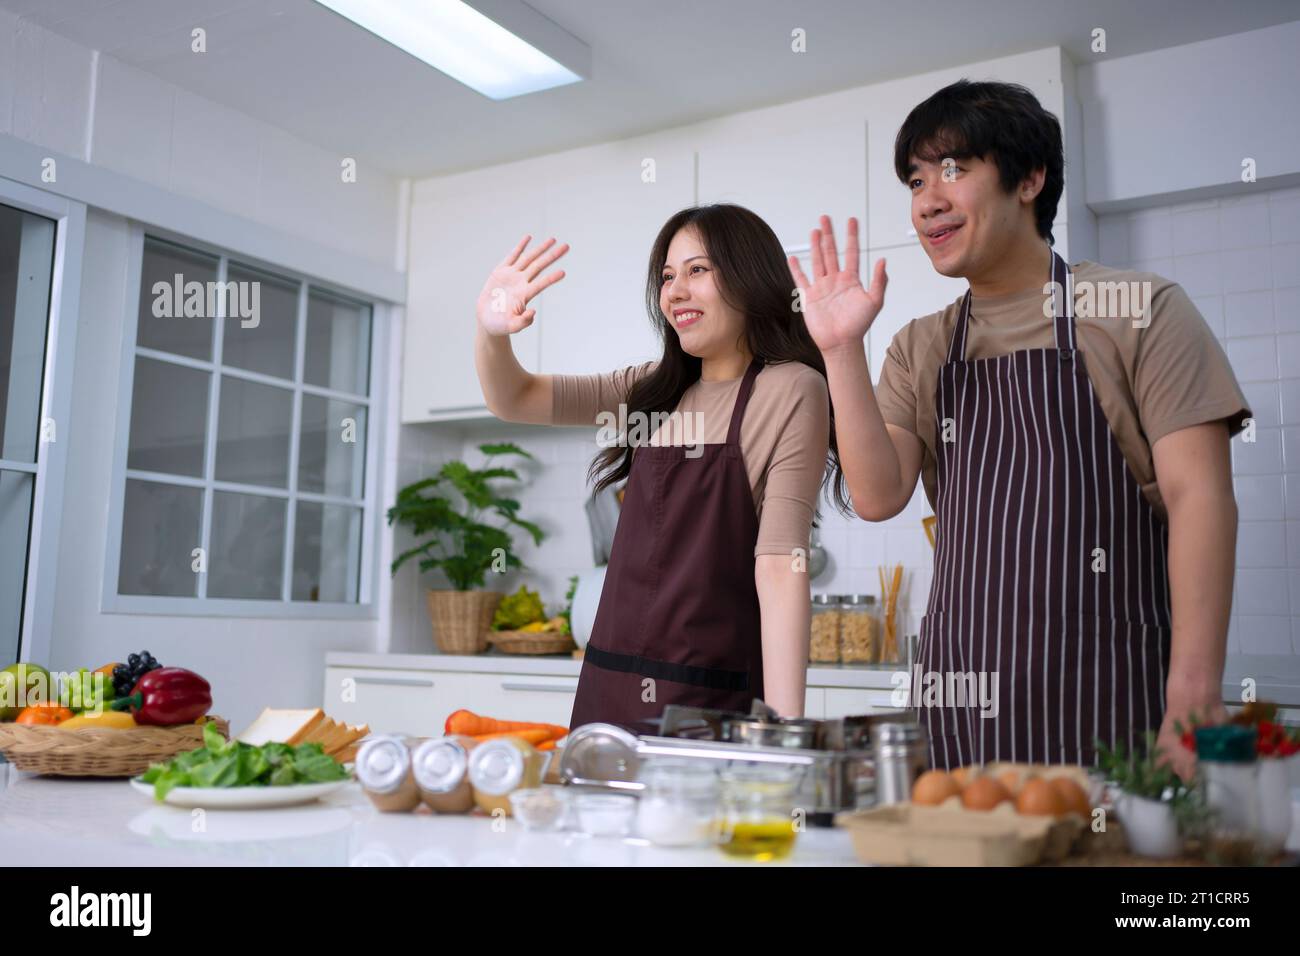 Young couple is cooking in kitchen. Lifestyle and leisure activity concept. Stock Photo